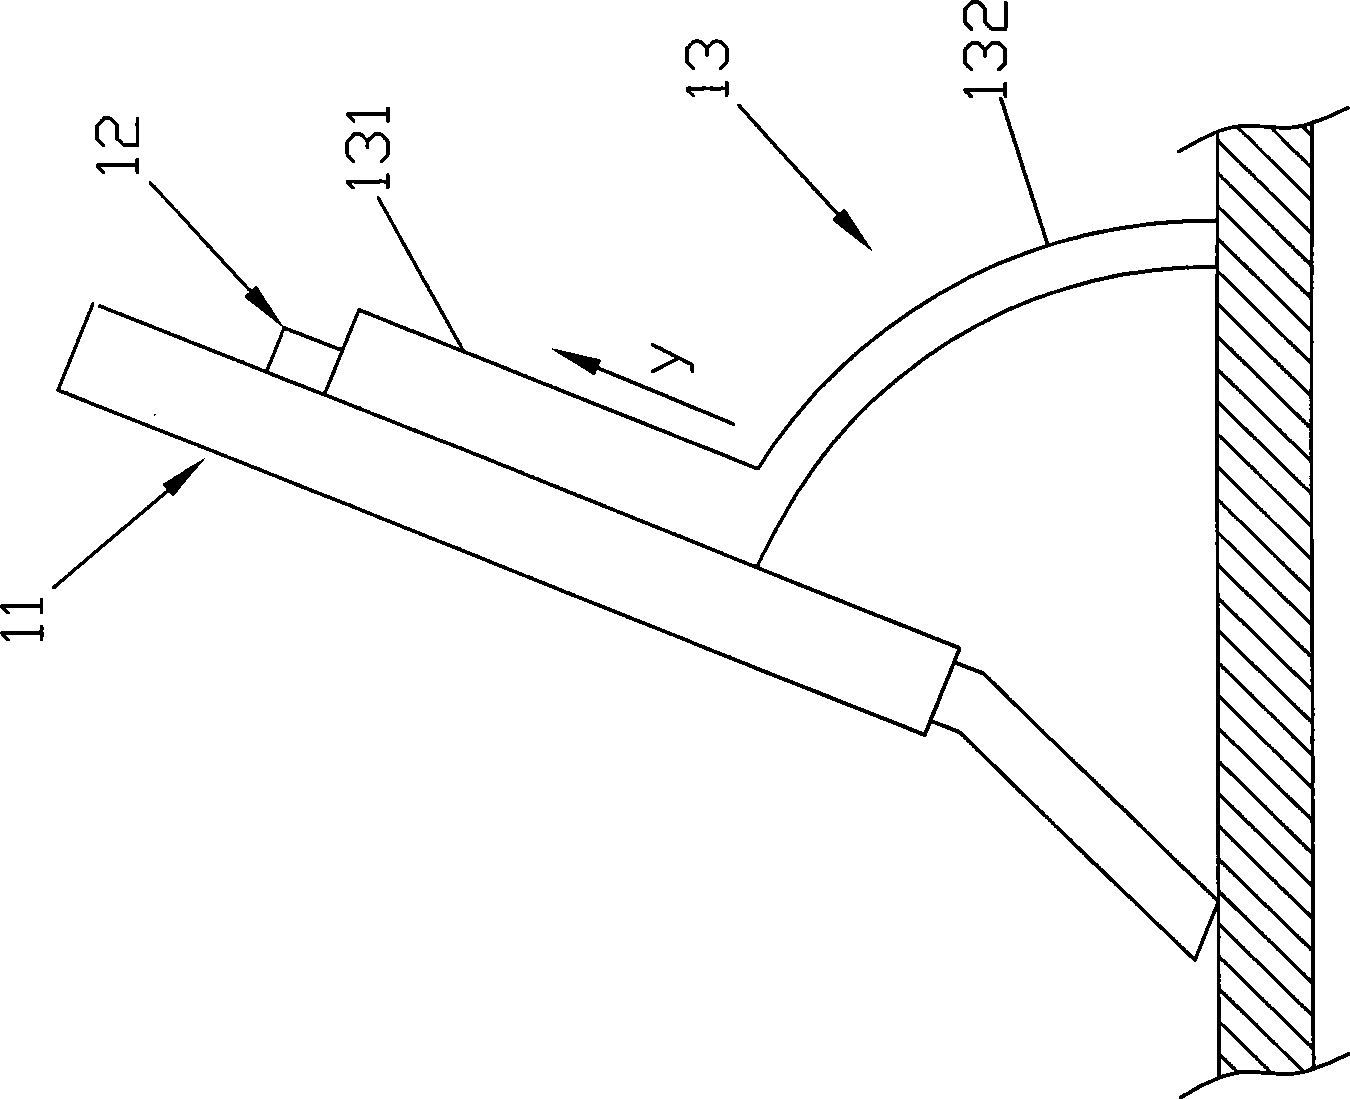 Display apparatus with elevation angle regulation device